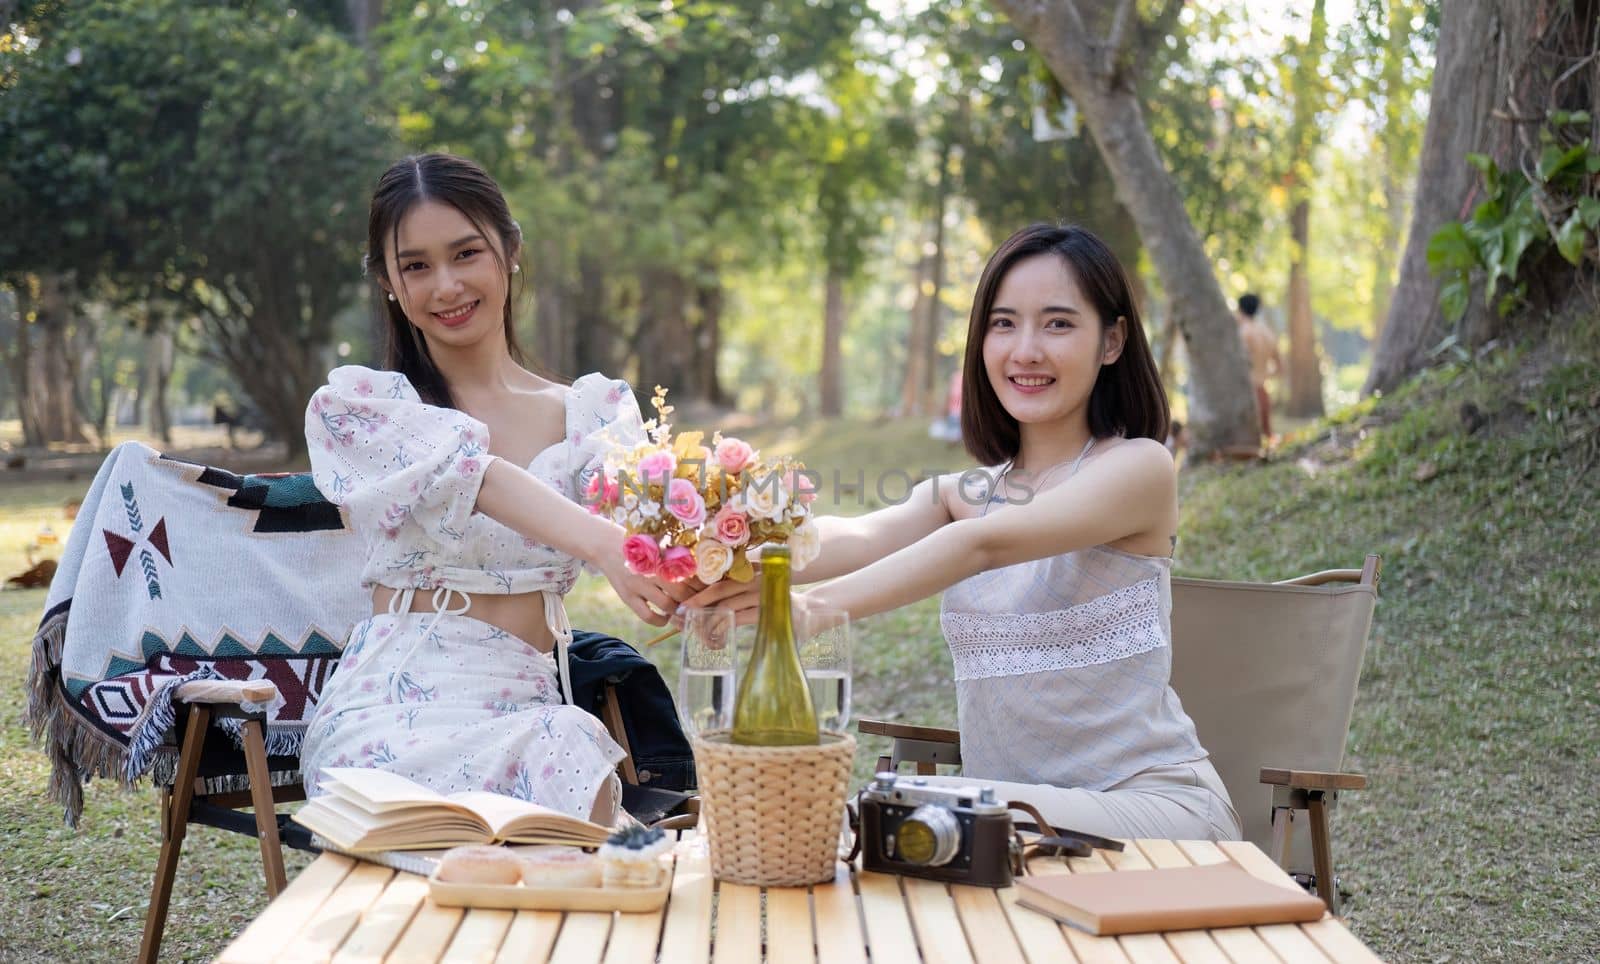 Gorgeous Asian woman giving a beautiful roses bouquet to her friend, having a special moment together in the park. female couple, lesbian, bestfriend, besties.